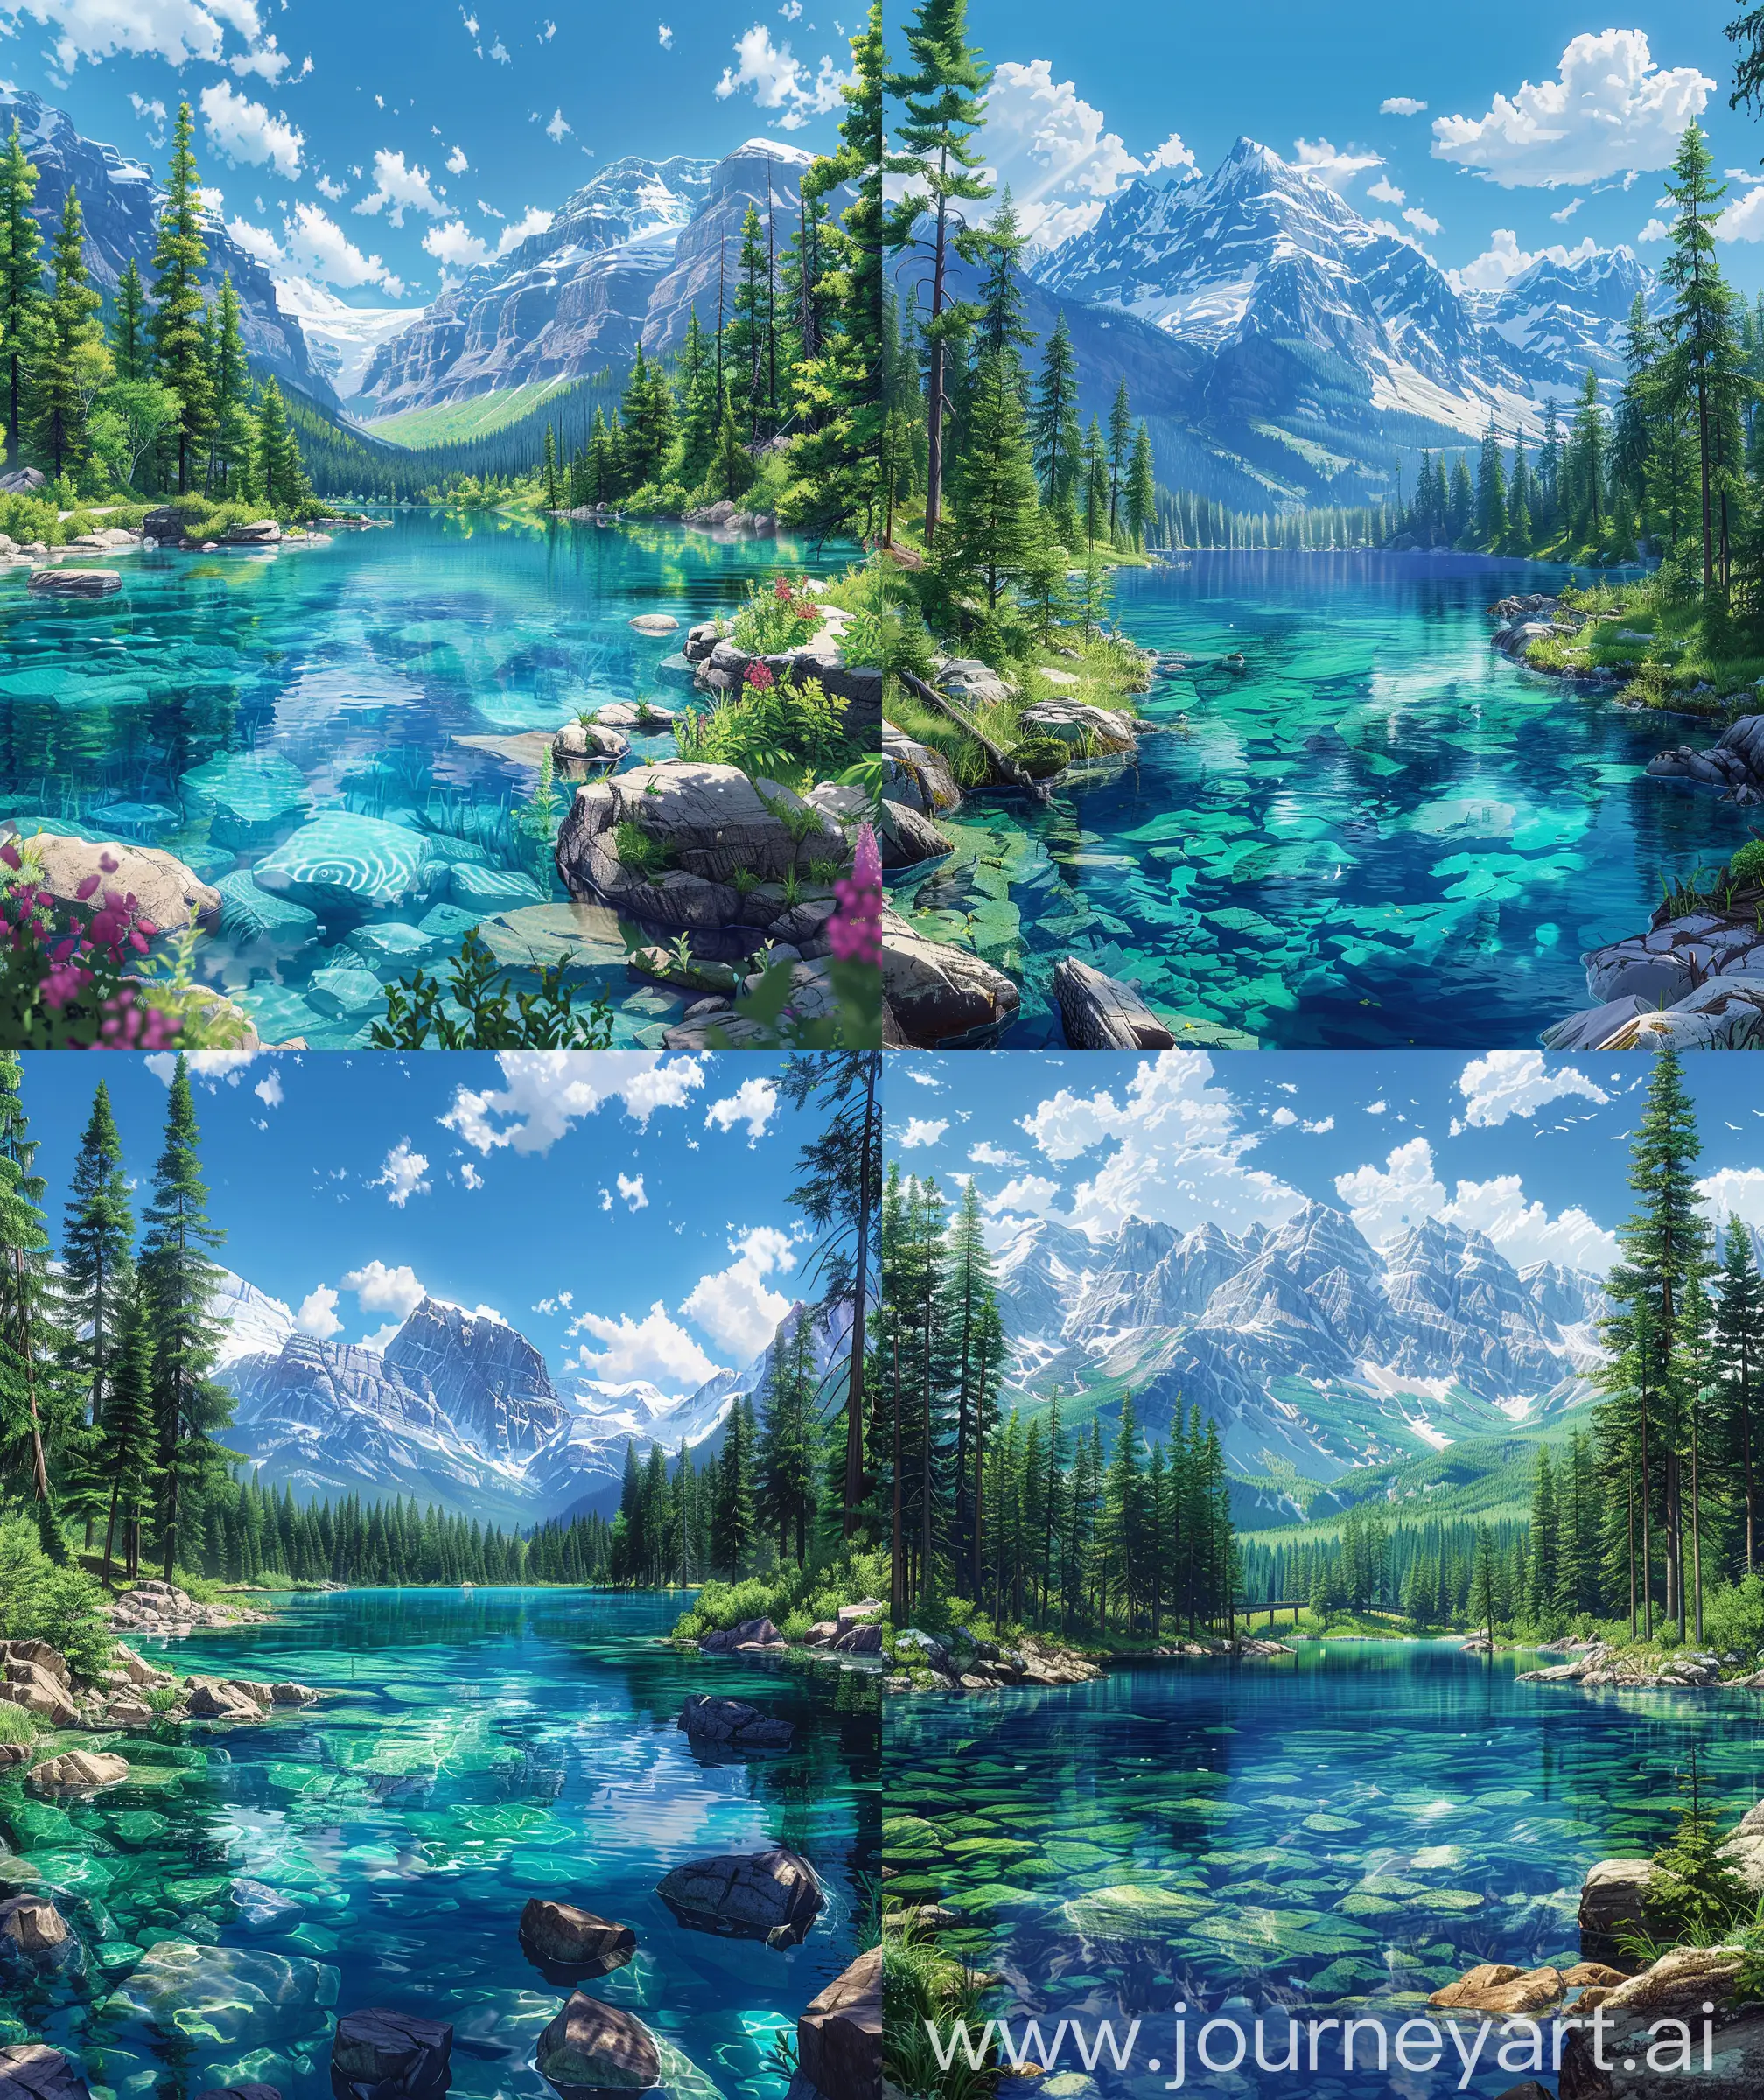 Serene-Anime-Scenery-Jasper-National-Parks-Crystal-Clear-Lake-and-Lush-Forest